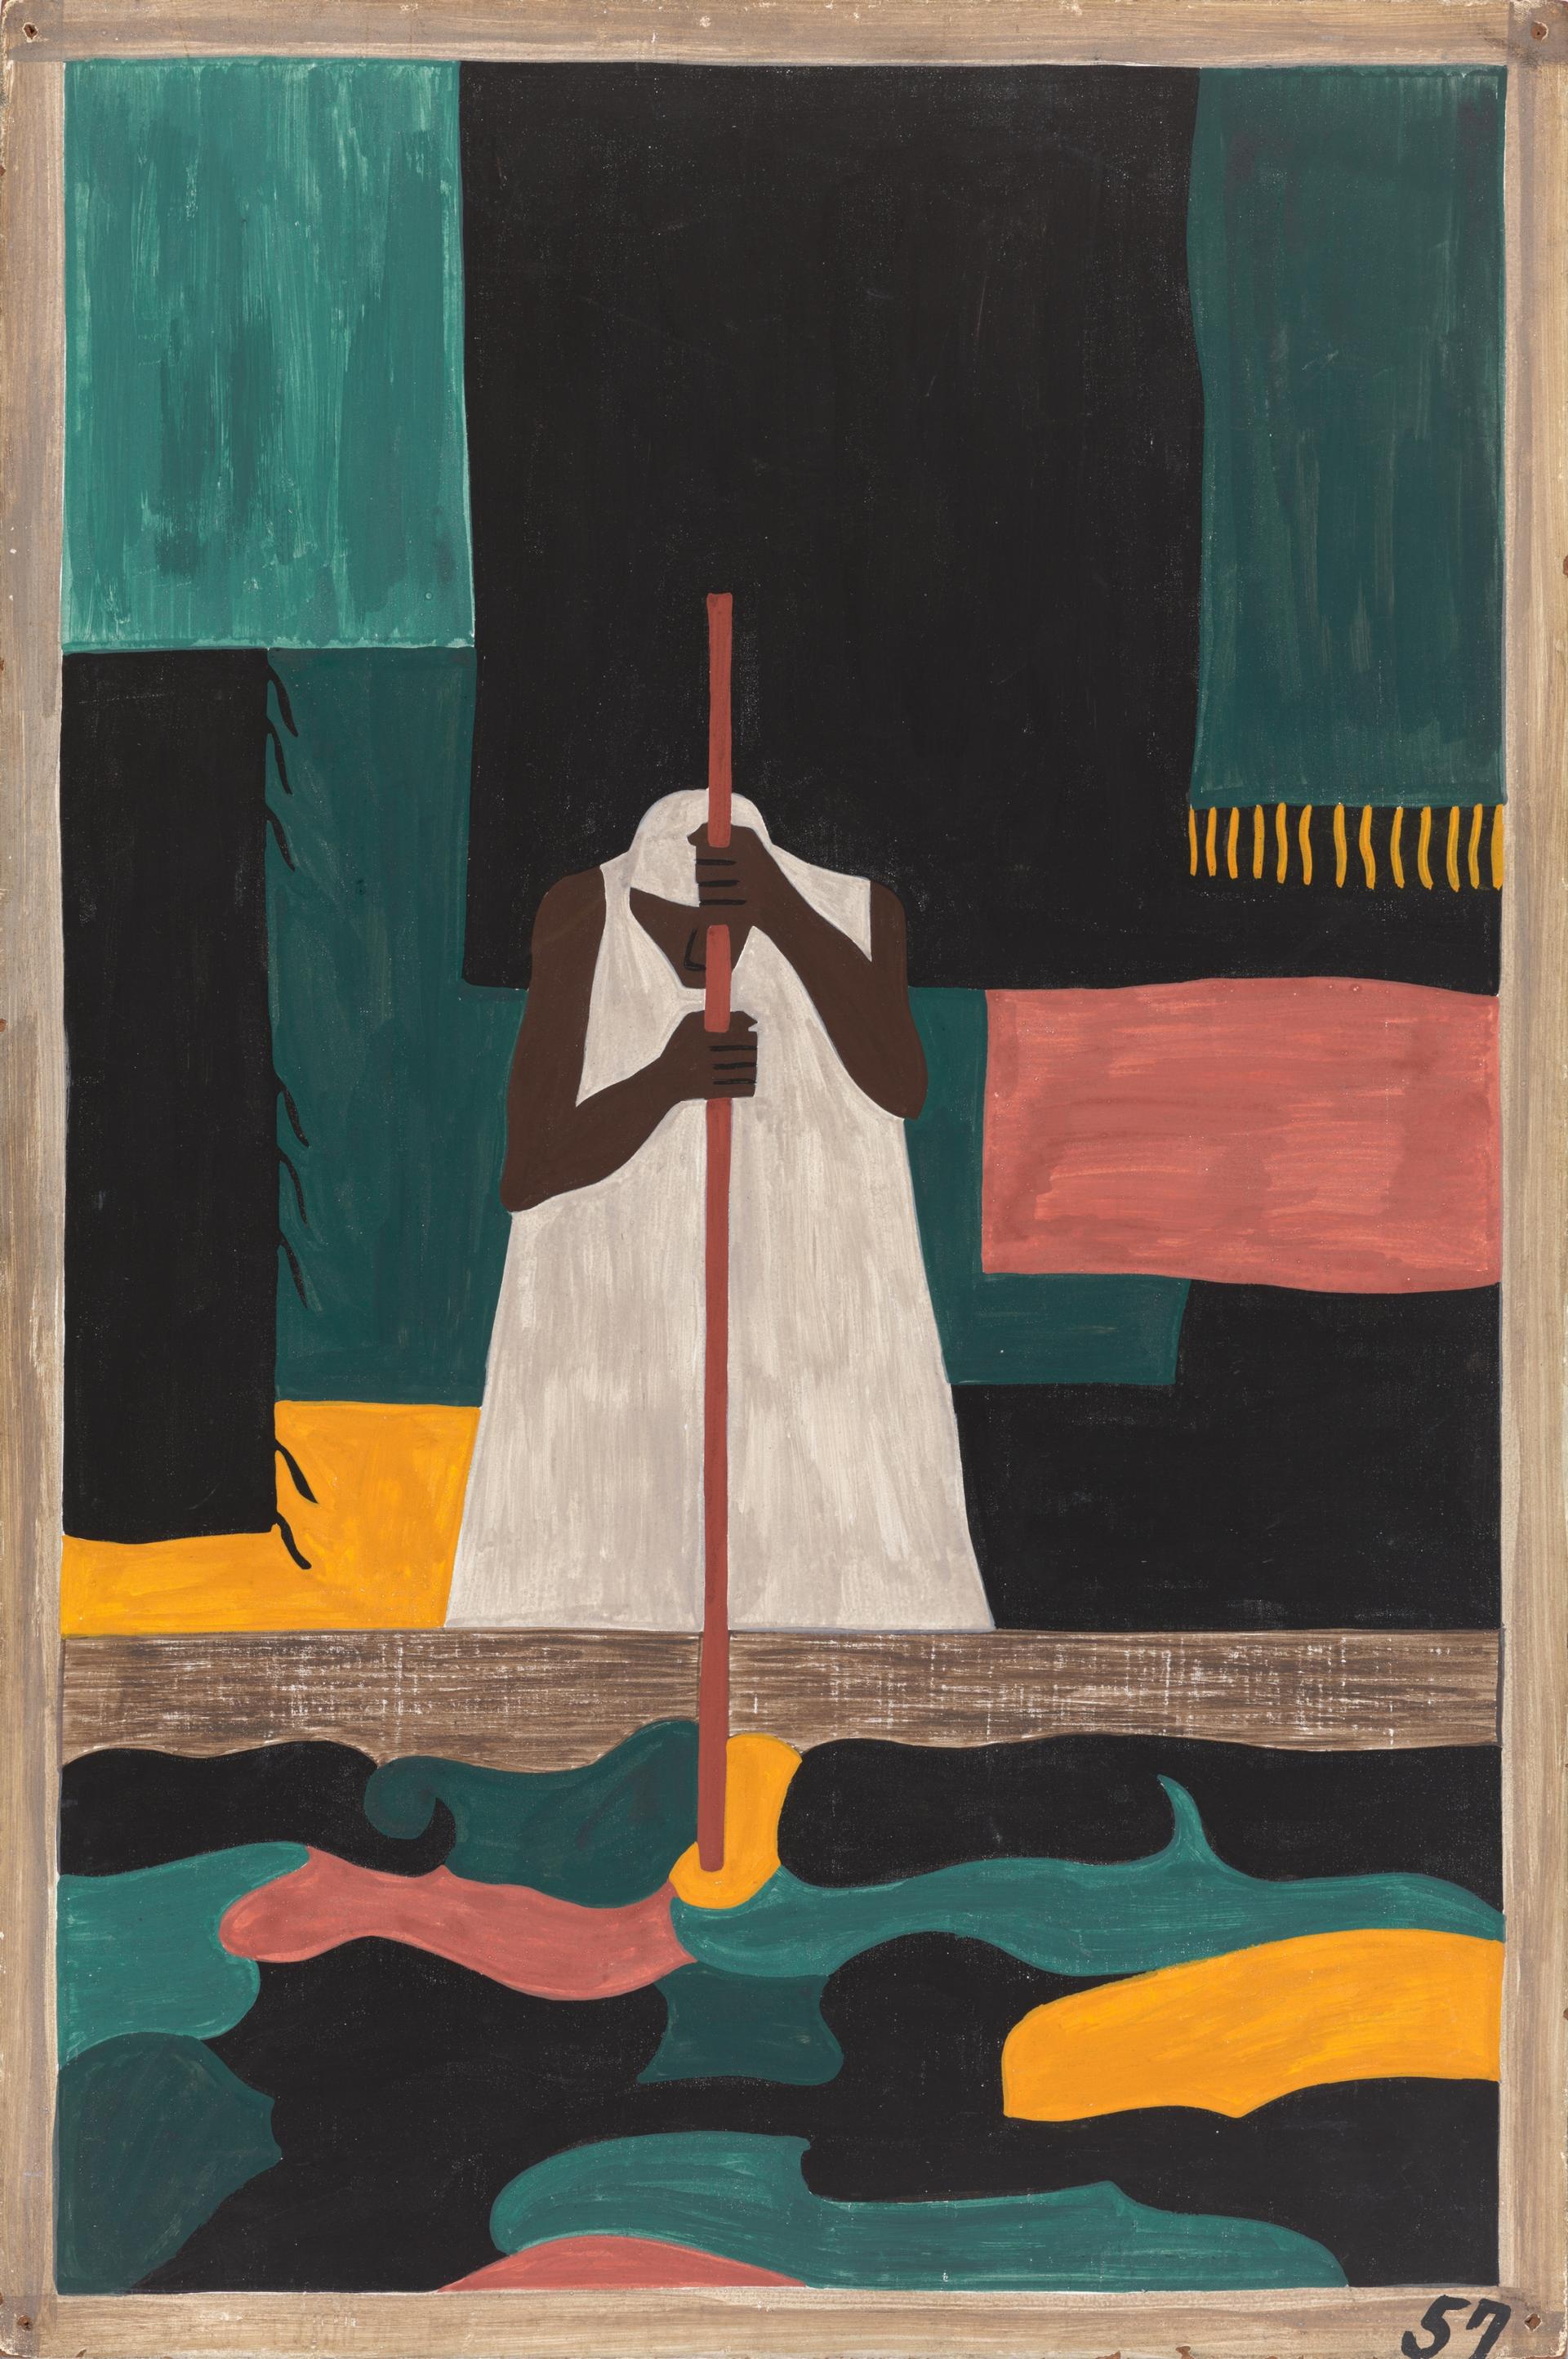 Jacob Lawrence, “The Migration Series, Panel no. 57: The female workers were the last to arrive north.,” 1940–41. Casein tempera on hardboard, 12 x 18 in.